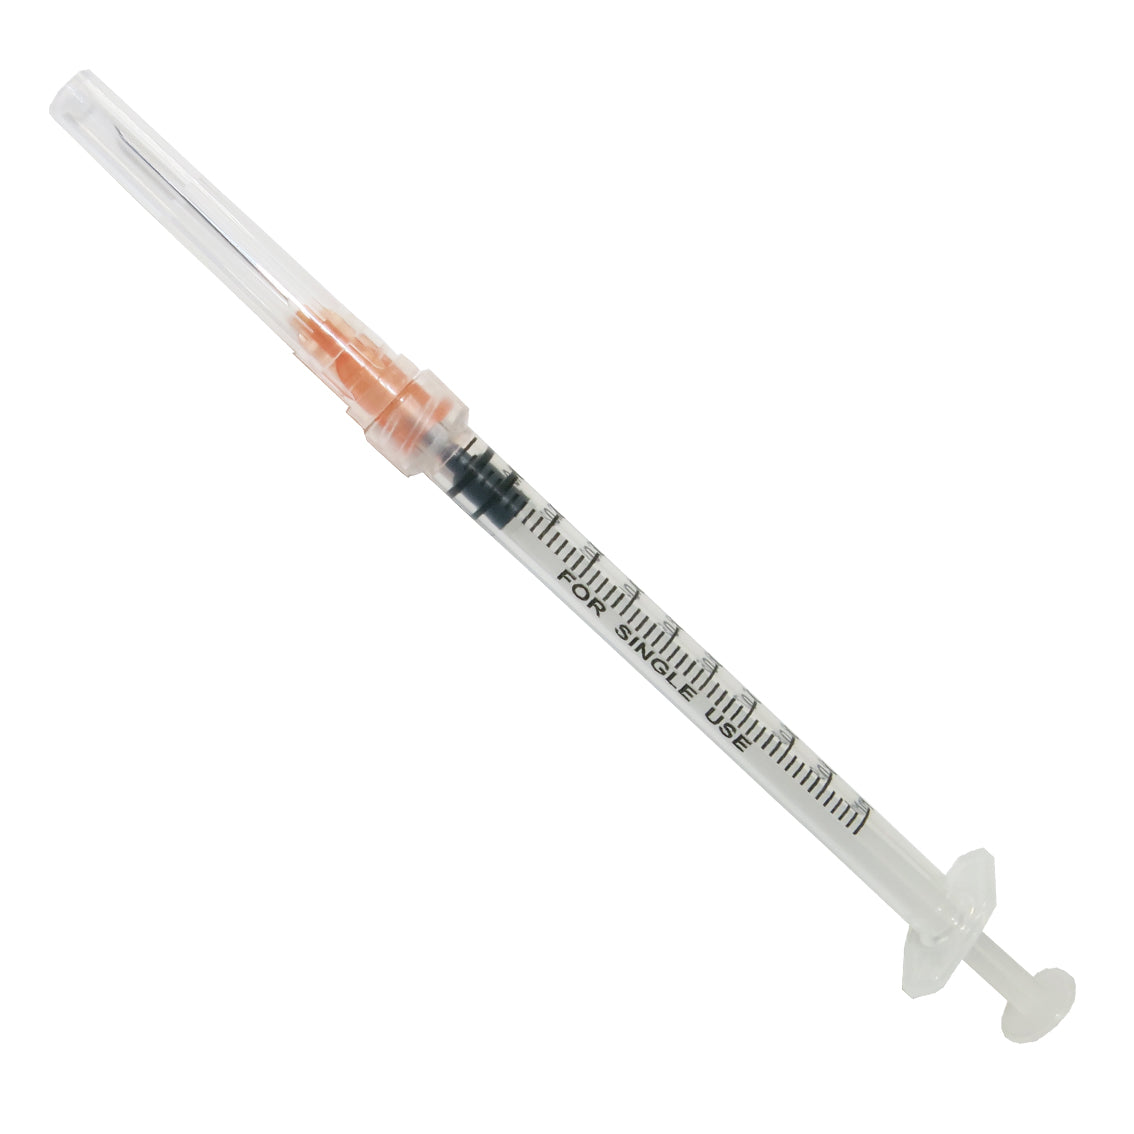 Disposable Hypodermic Syringe 1 ml/cc Blister Pack Luer Lock Tip Without Safety - Osung USA